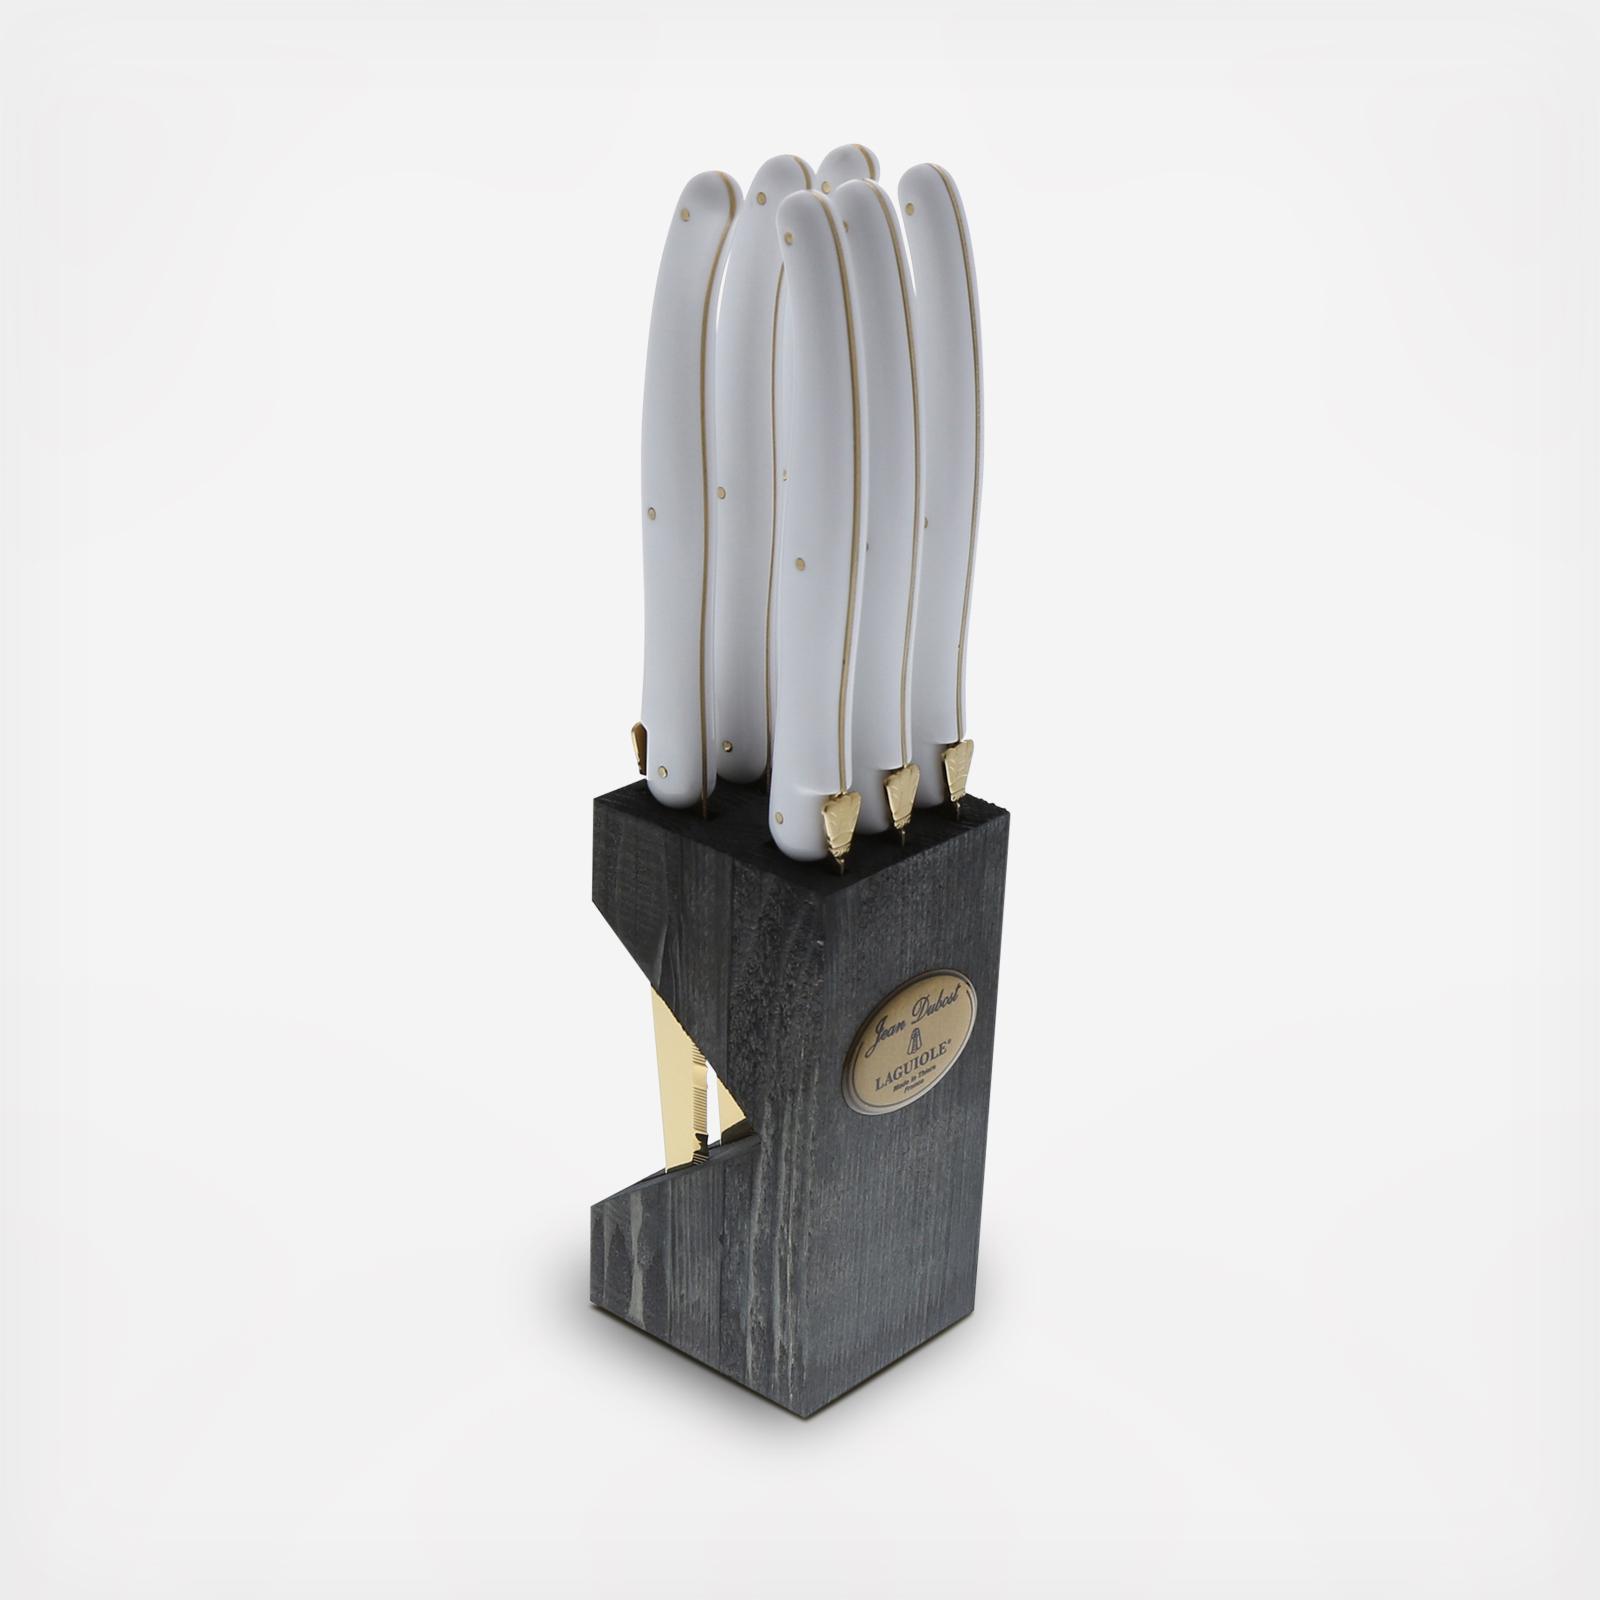 Jean Dubost 6 Steak Knives with White Handles in Black Tray